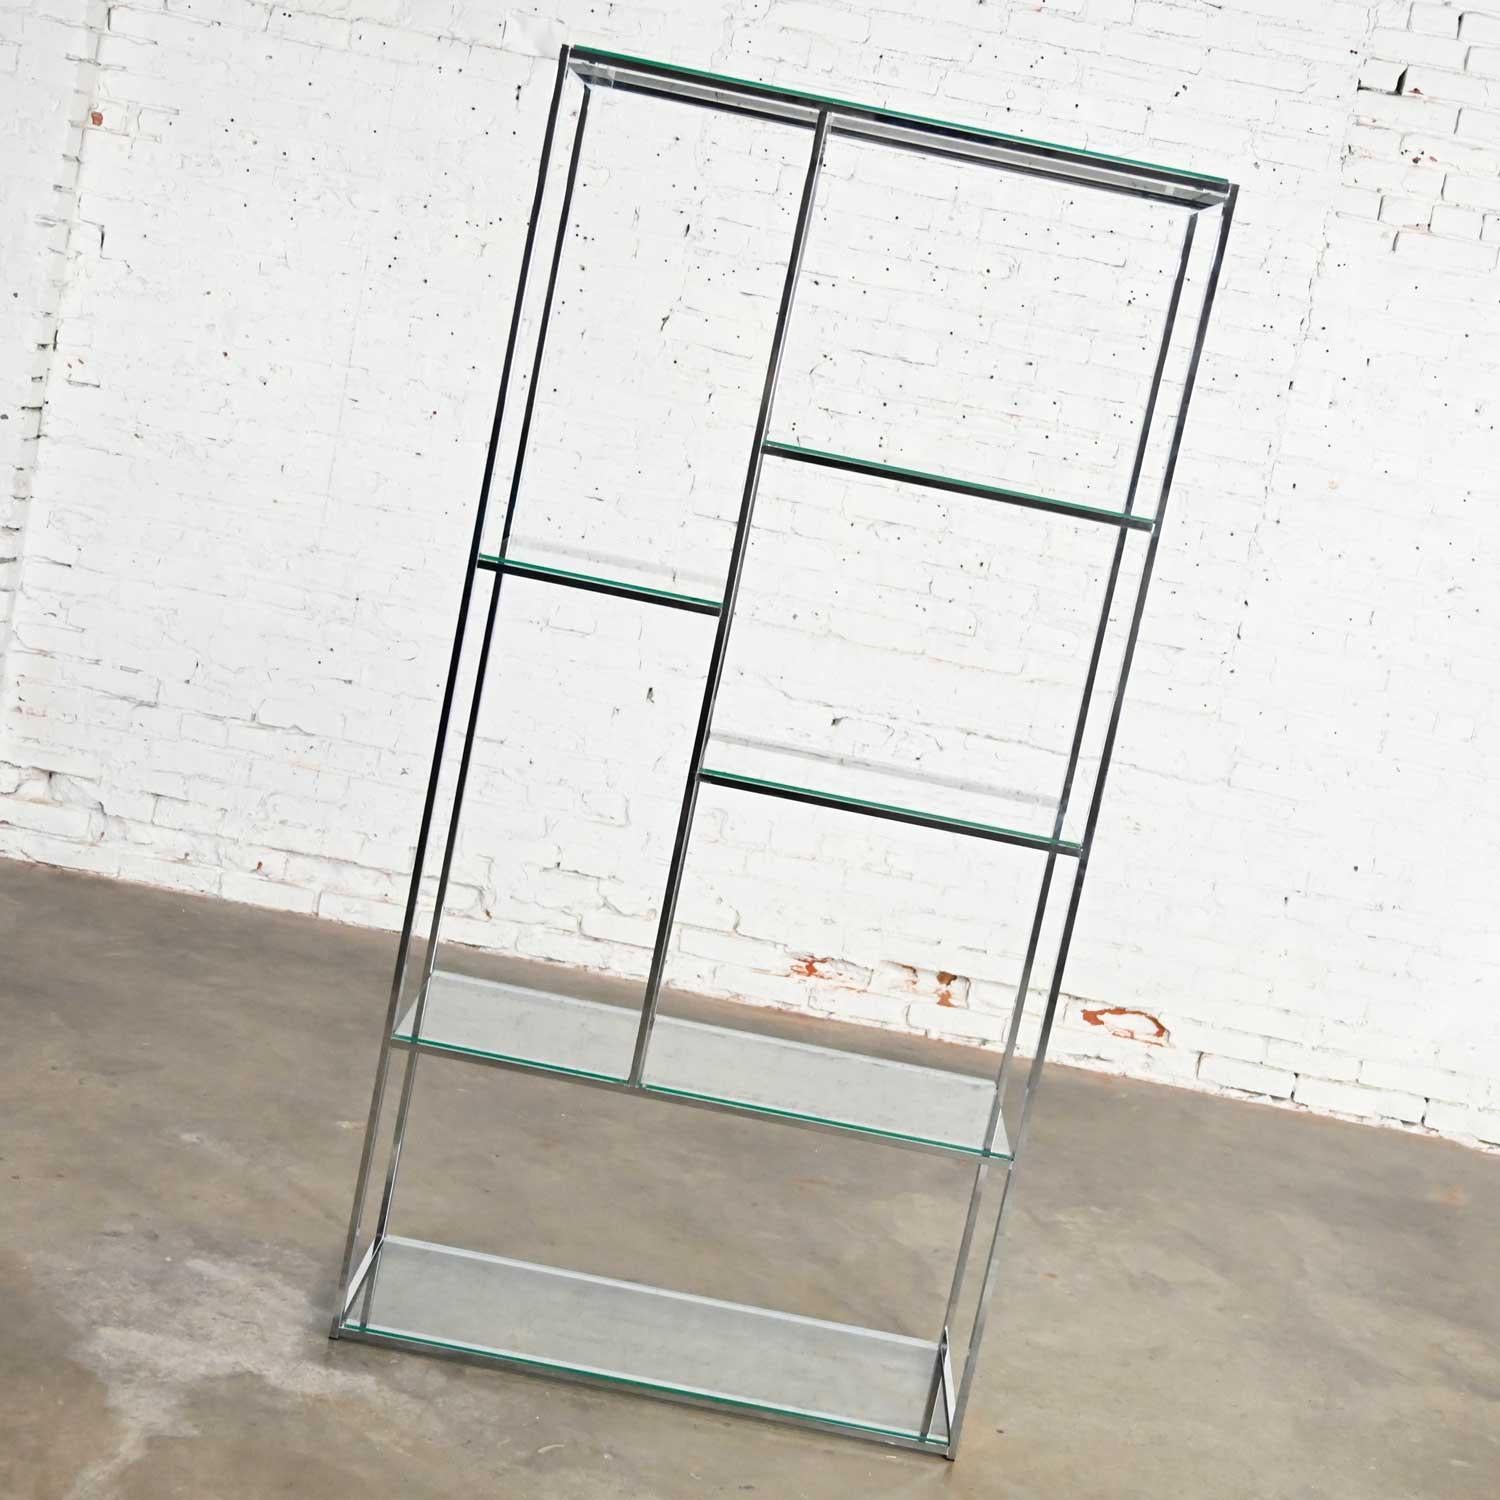 Lovely Mid-Century Modern chrome etagere with 6 glass shelves with Piet Mondrian shelf placement. Beautiful condition, keeping in mind that this is vintage and not new so will have signs of use and wear. No chips or chiggers that we have detected.